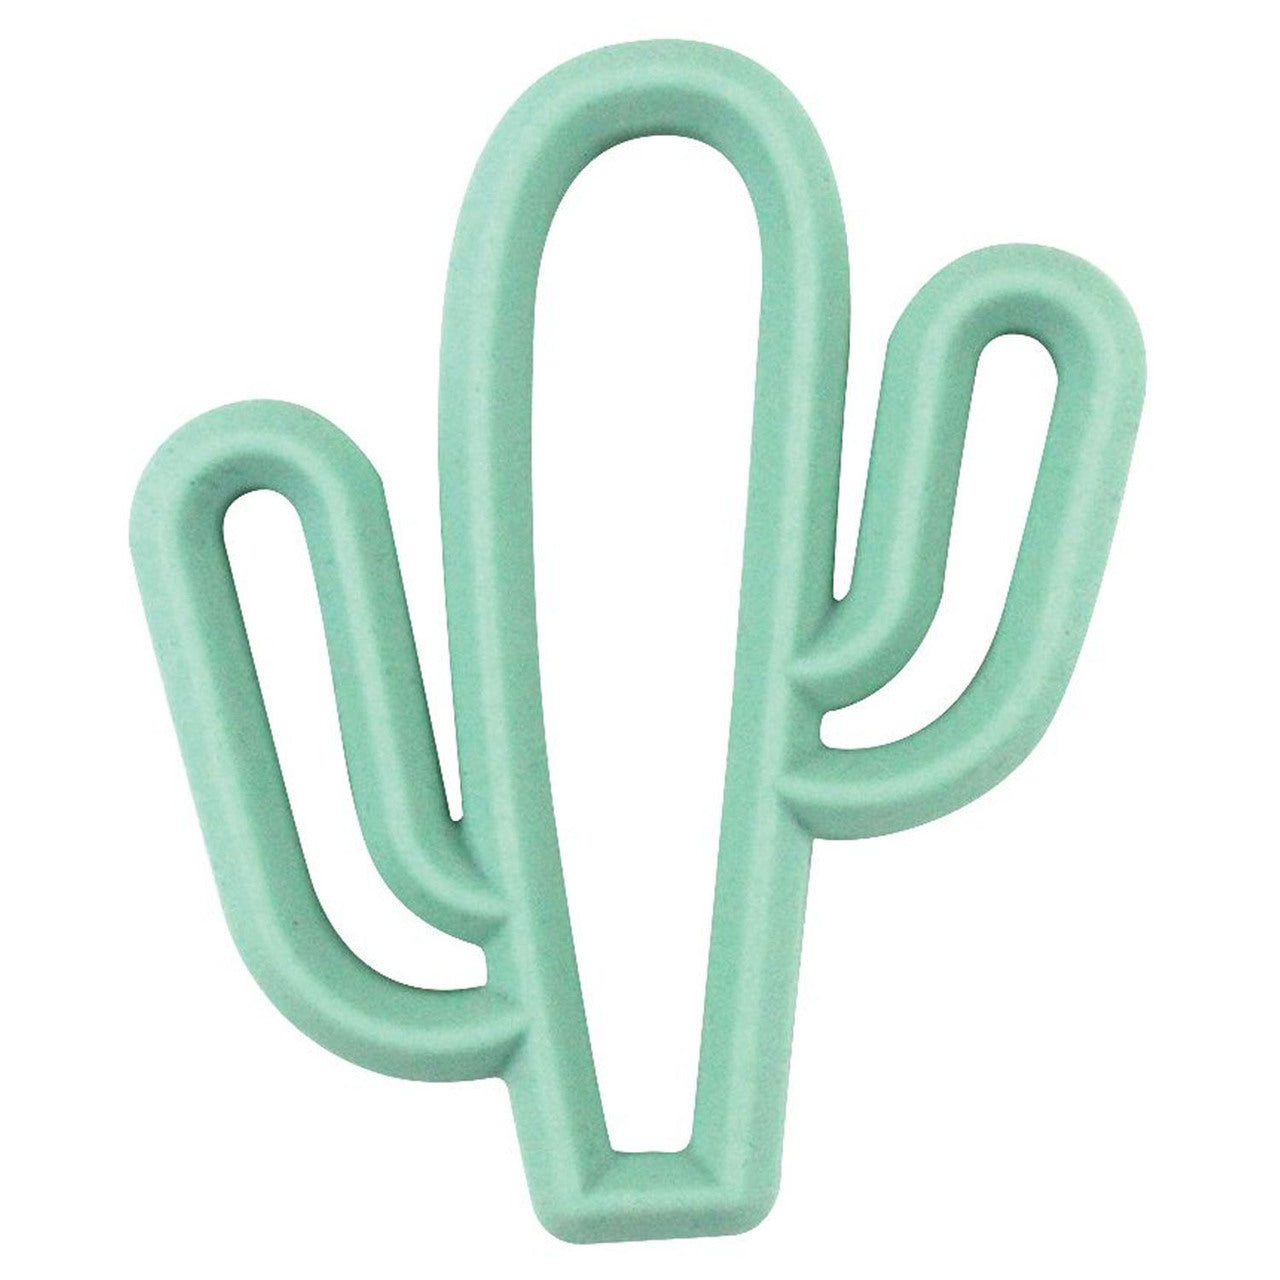 SpearmintLOVE’s baby Silicone Baby Teether, Cactus